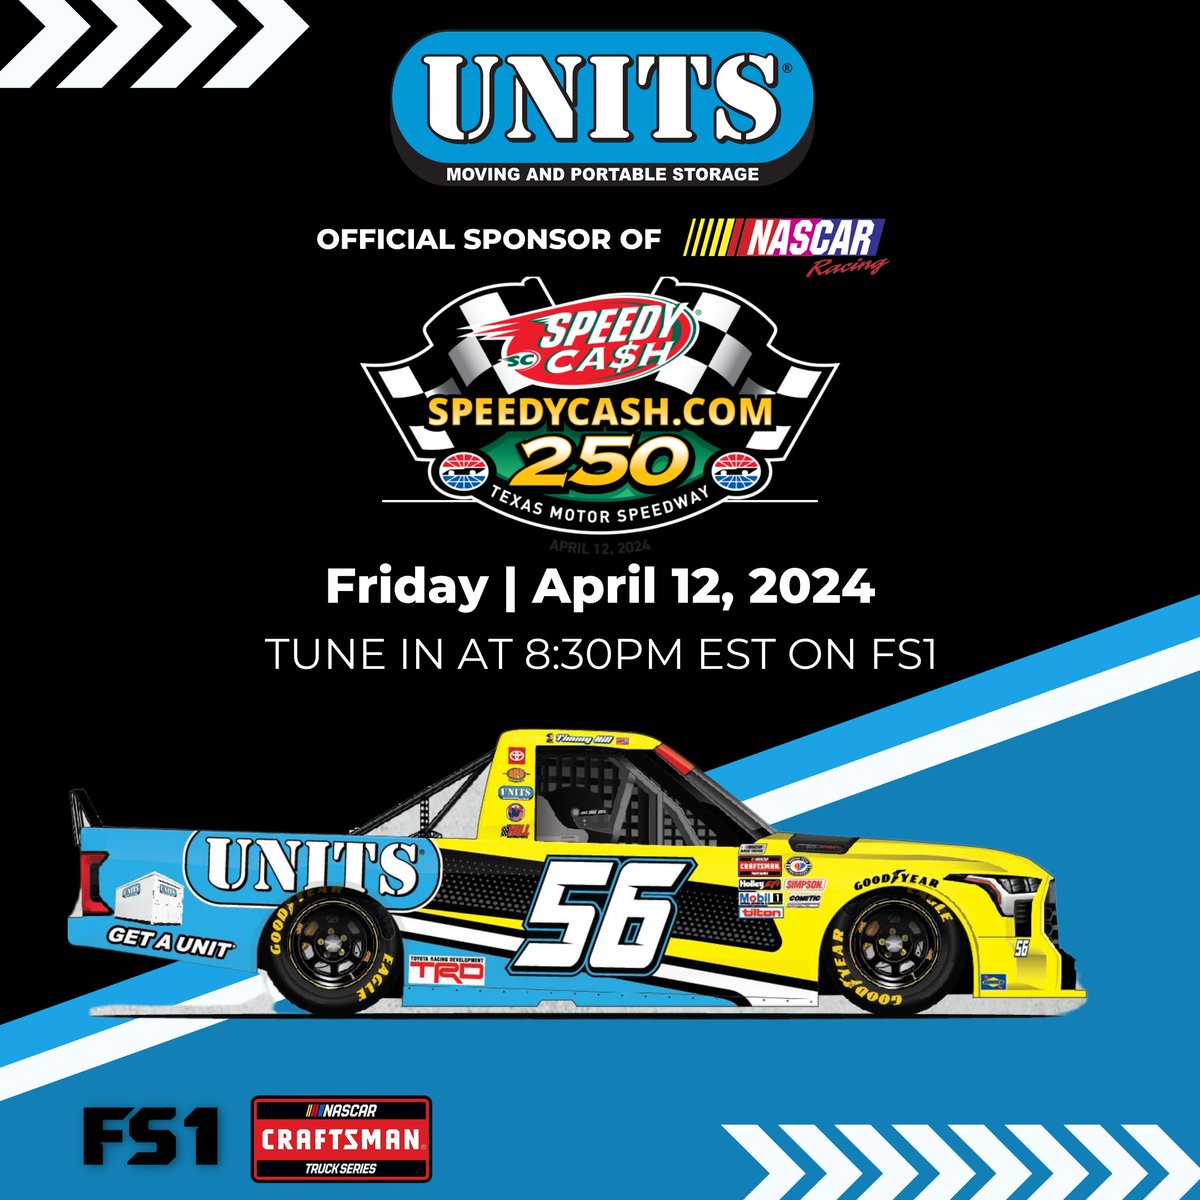 Rev up your engines and join us at Texas Motor Speedway this Friday, April 12th at 7:30 PM EST as the #56 UNITS Moving & Portable Storage truck takes on the competition in the Speedycash.com 250! 🏁